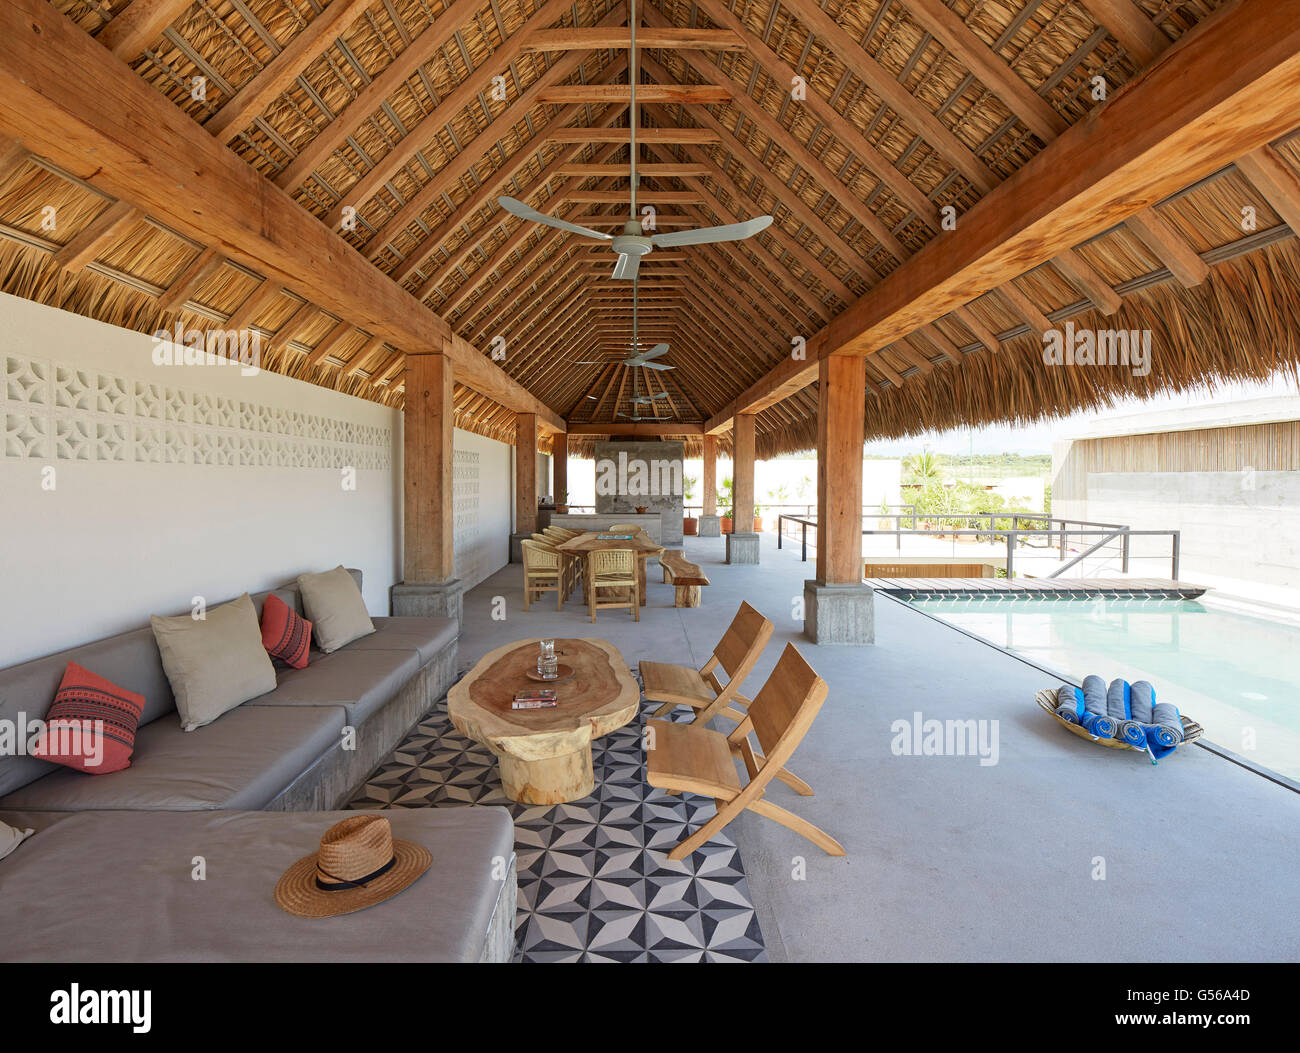 Covered area on upper level from under palapa. Casa Cal, Puerto Escondido, Mexico. Architect: BAAQ, 2015. Stock Photo